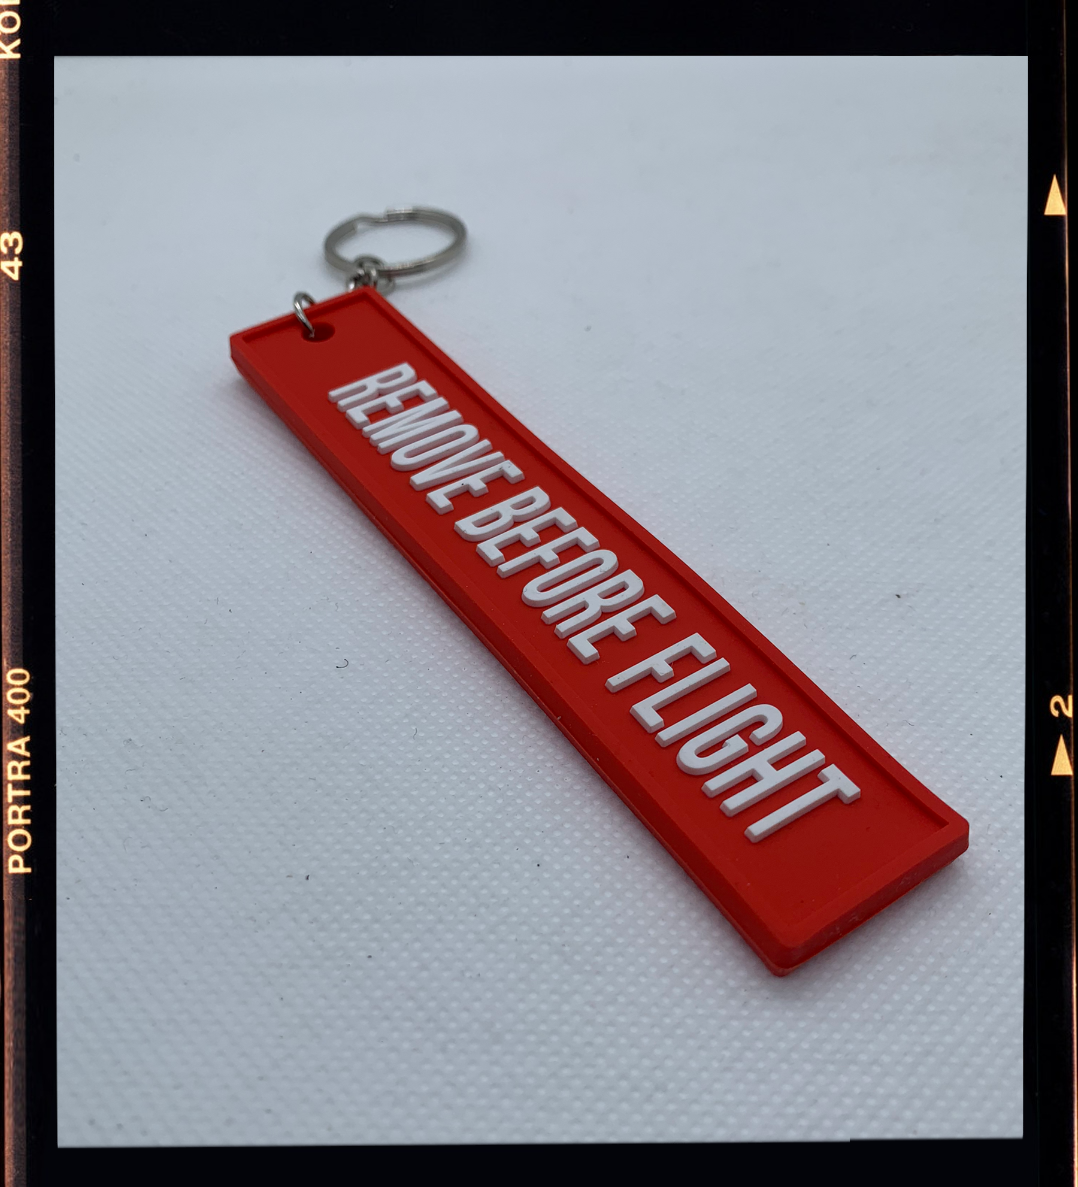 Flamme remove before flight - Cdiscount